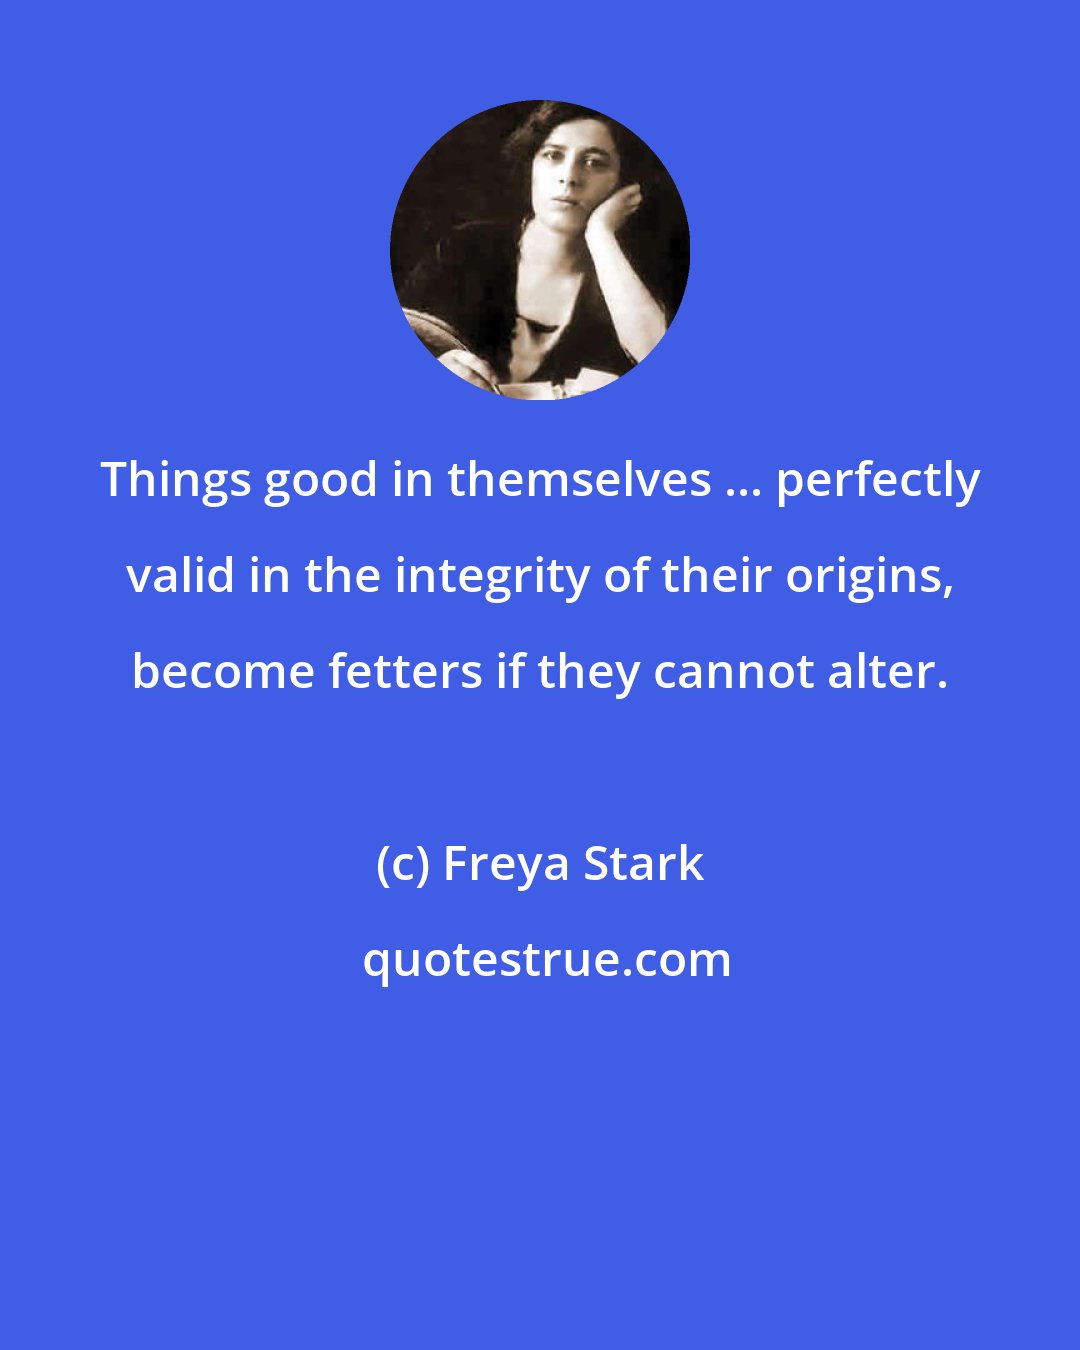 Freya Stark: Things good in themselves ... perfectly valid in the integrity of their origins, become fetters if they cannot alter.